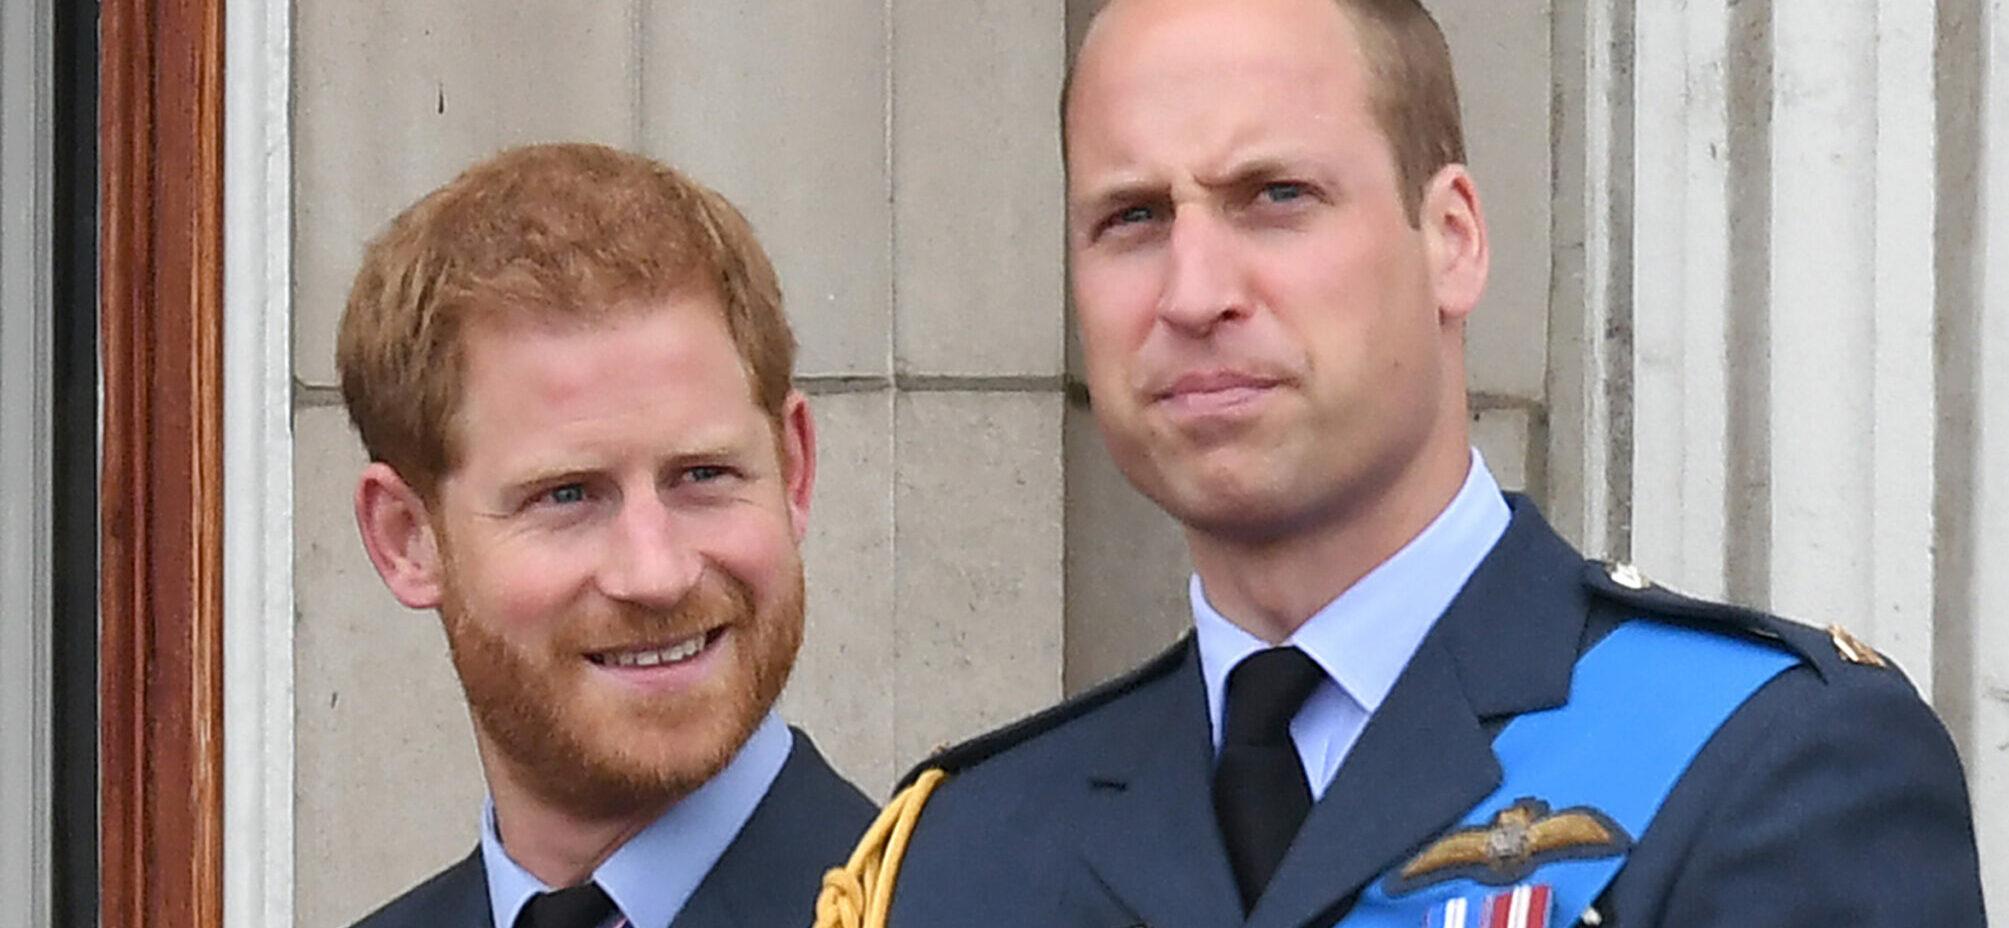 Prince Harry Reveals William ‘Knocked Him To The Floor’ In Ugly Fight Over Meghan Markle